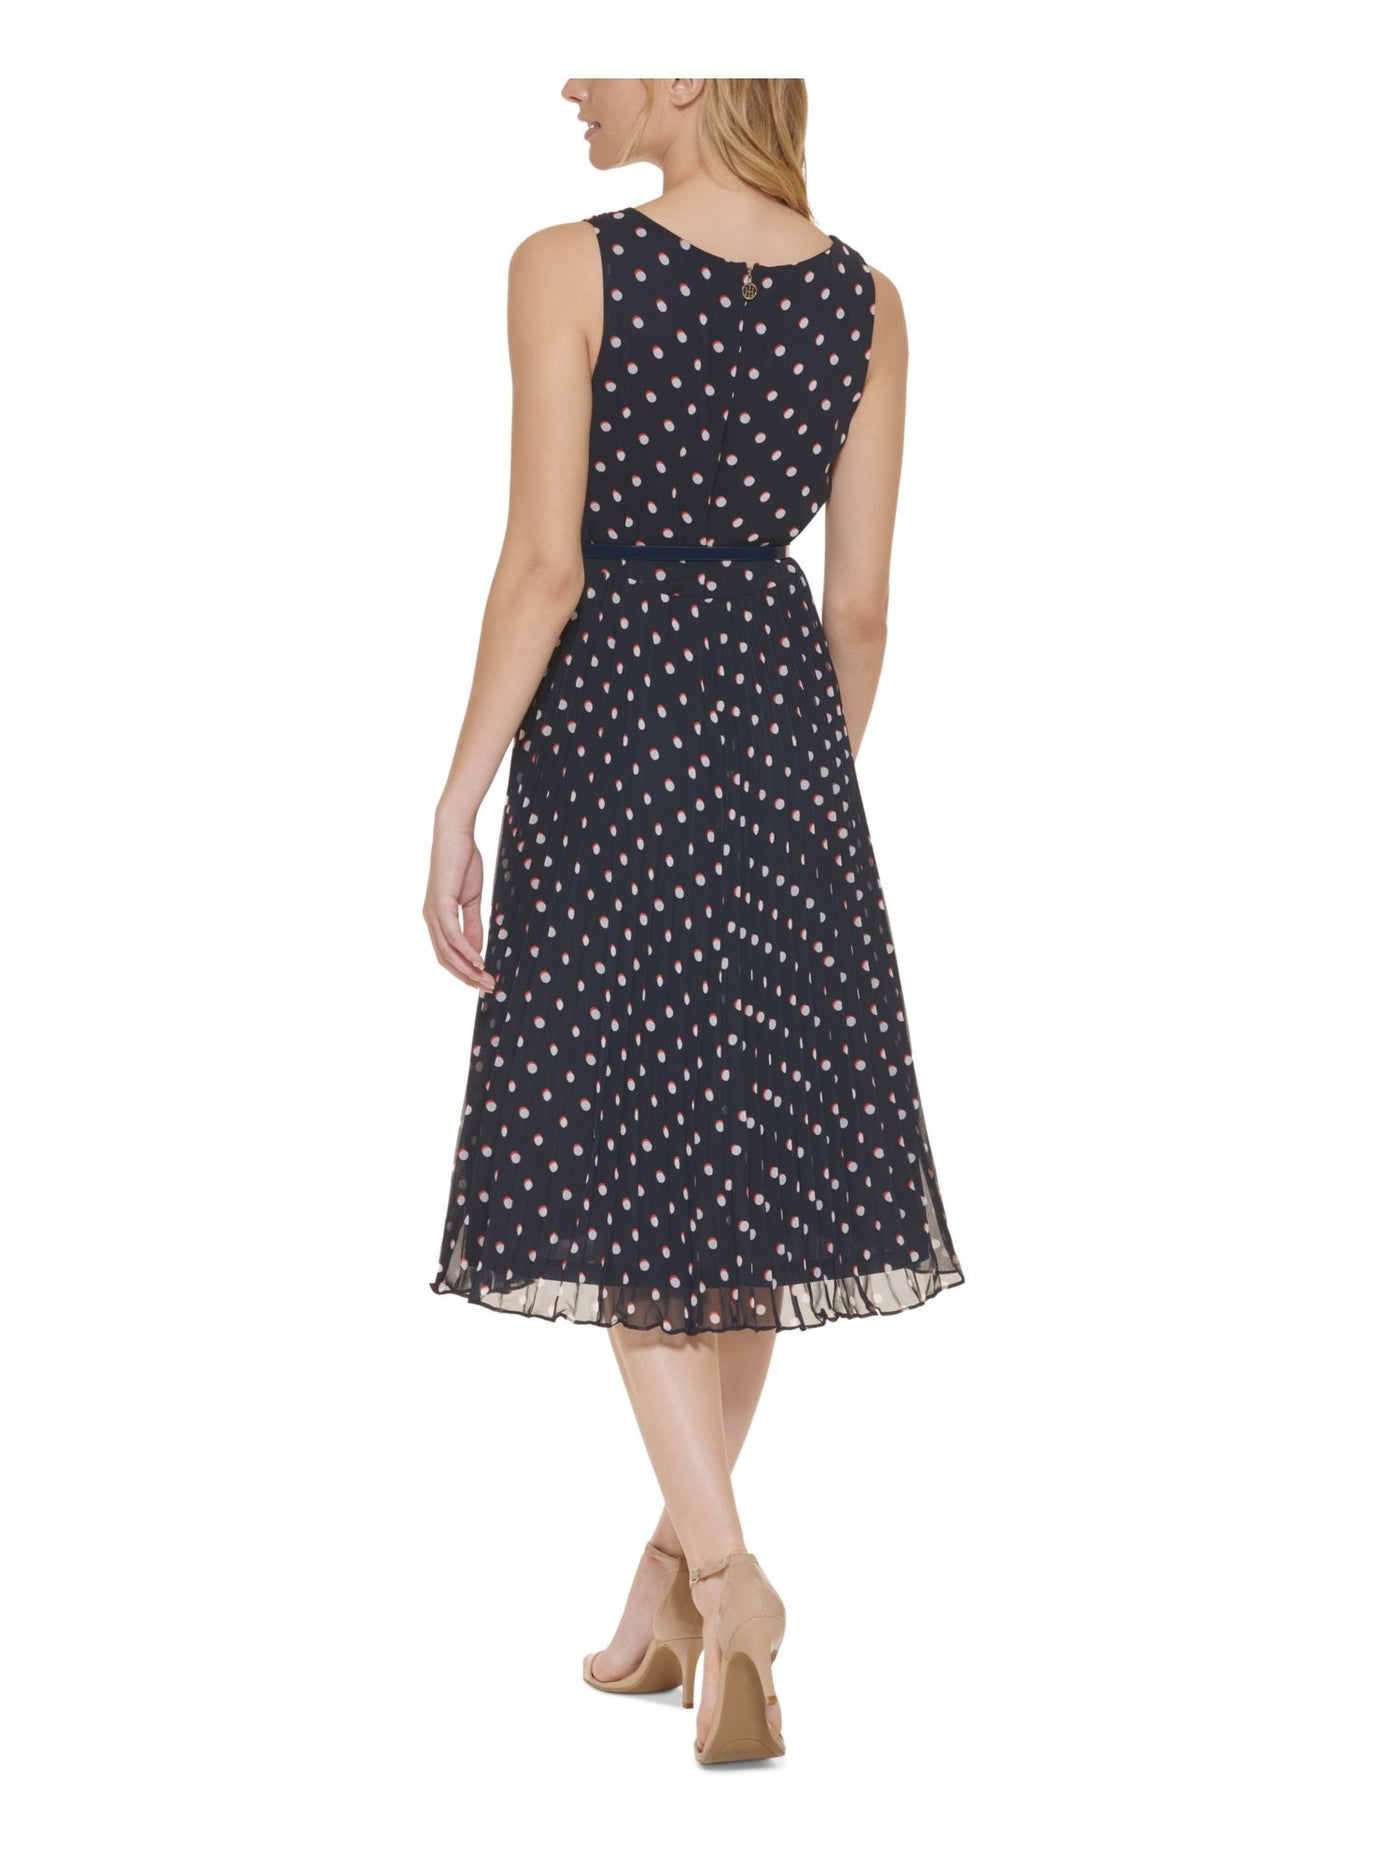 TOMMY HILFIGER Womens Navy Belted Zippered Sheer Lined Pleated Polka Dot Sleeveless Surplice Neckline Below The Knee Fit + Flare Dress Petites 0P